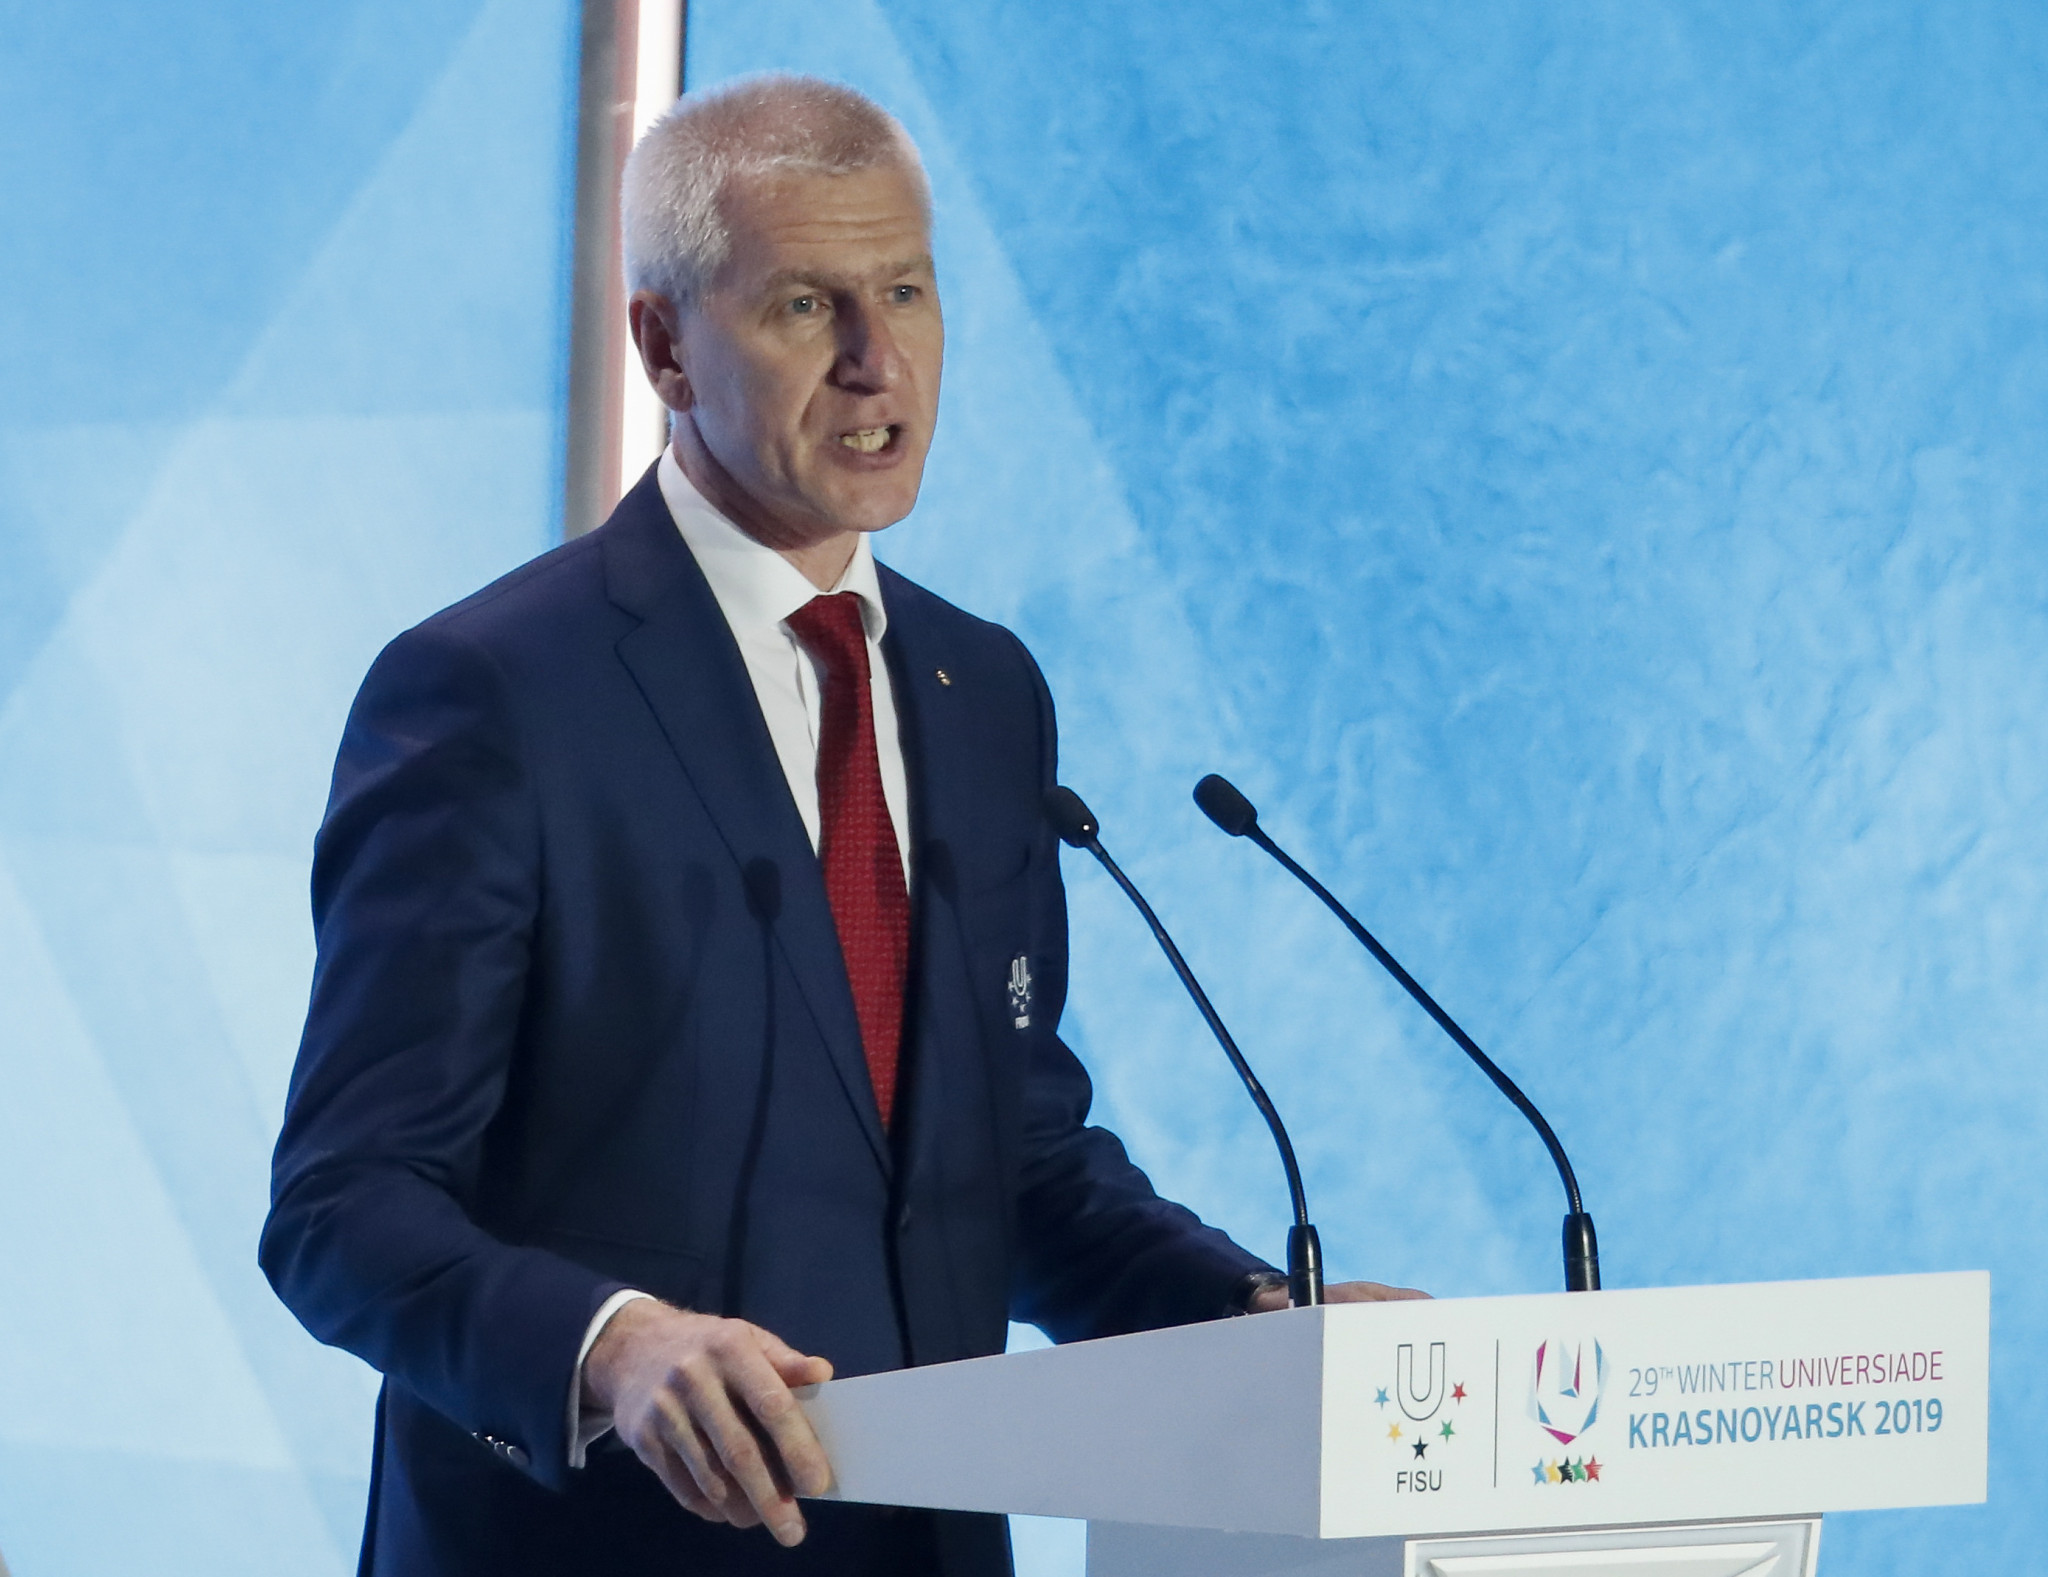 FISU President Oleg Matytsin called on athletes to embrace the opportunity of the Universiade ©Getty Images